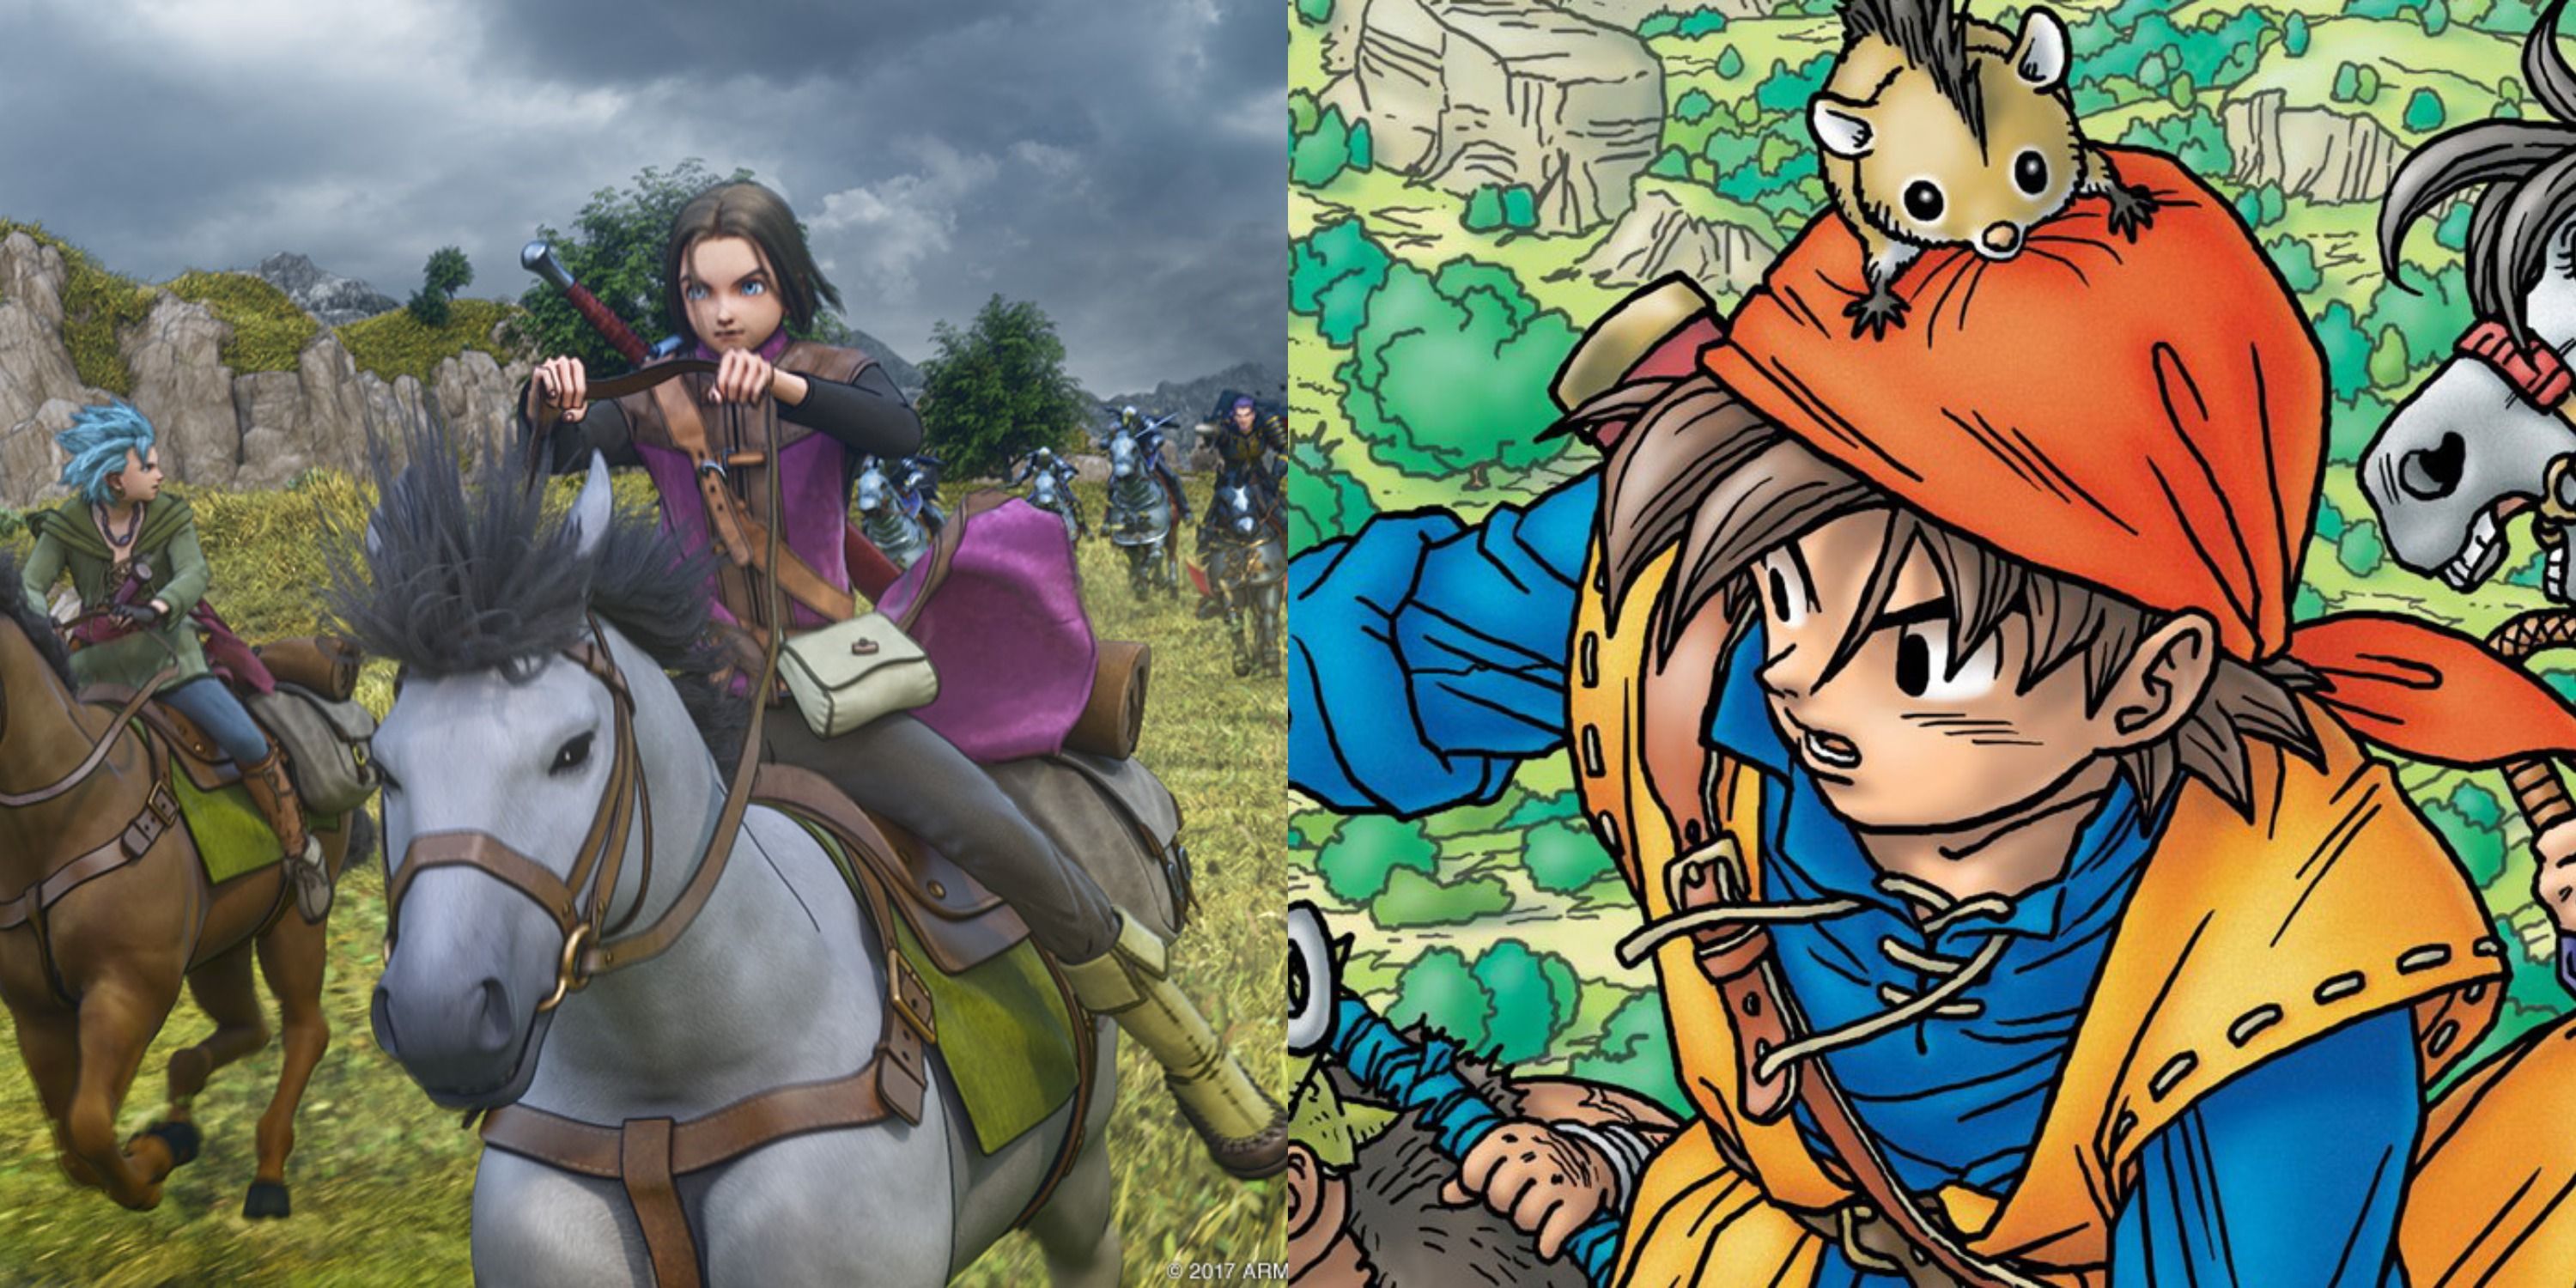 Dragon Quest The 10 Best Games In The Series, According To Metacritic